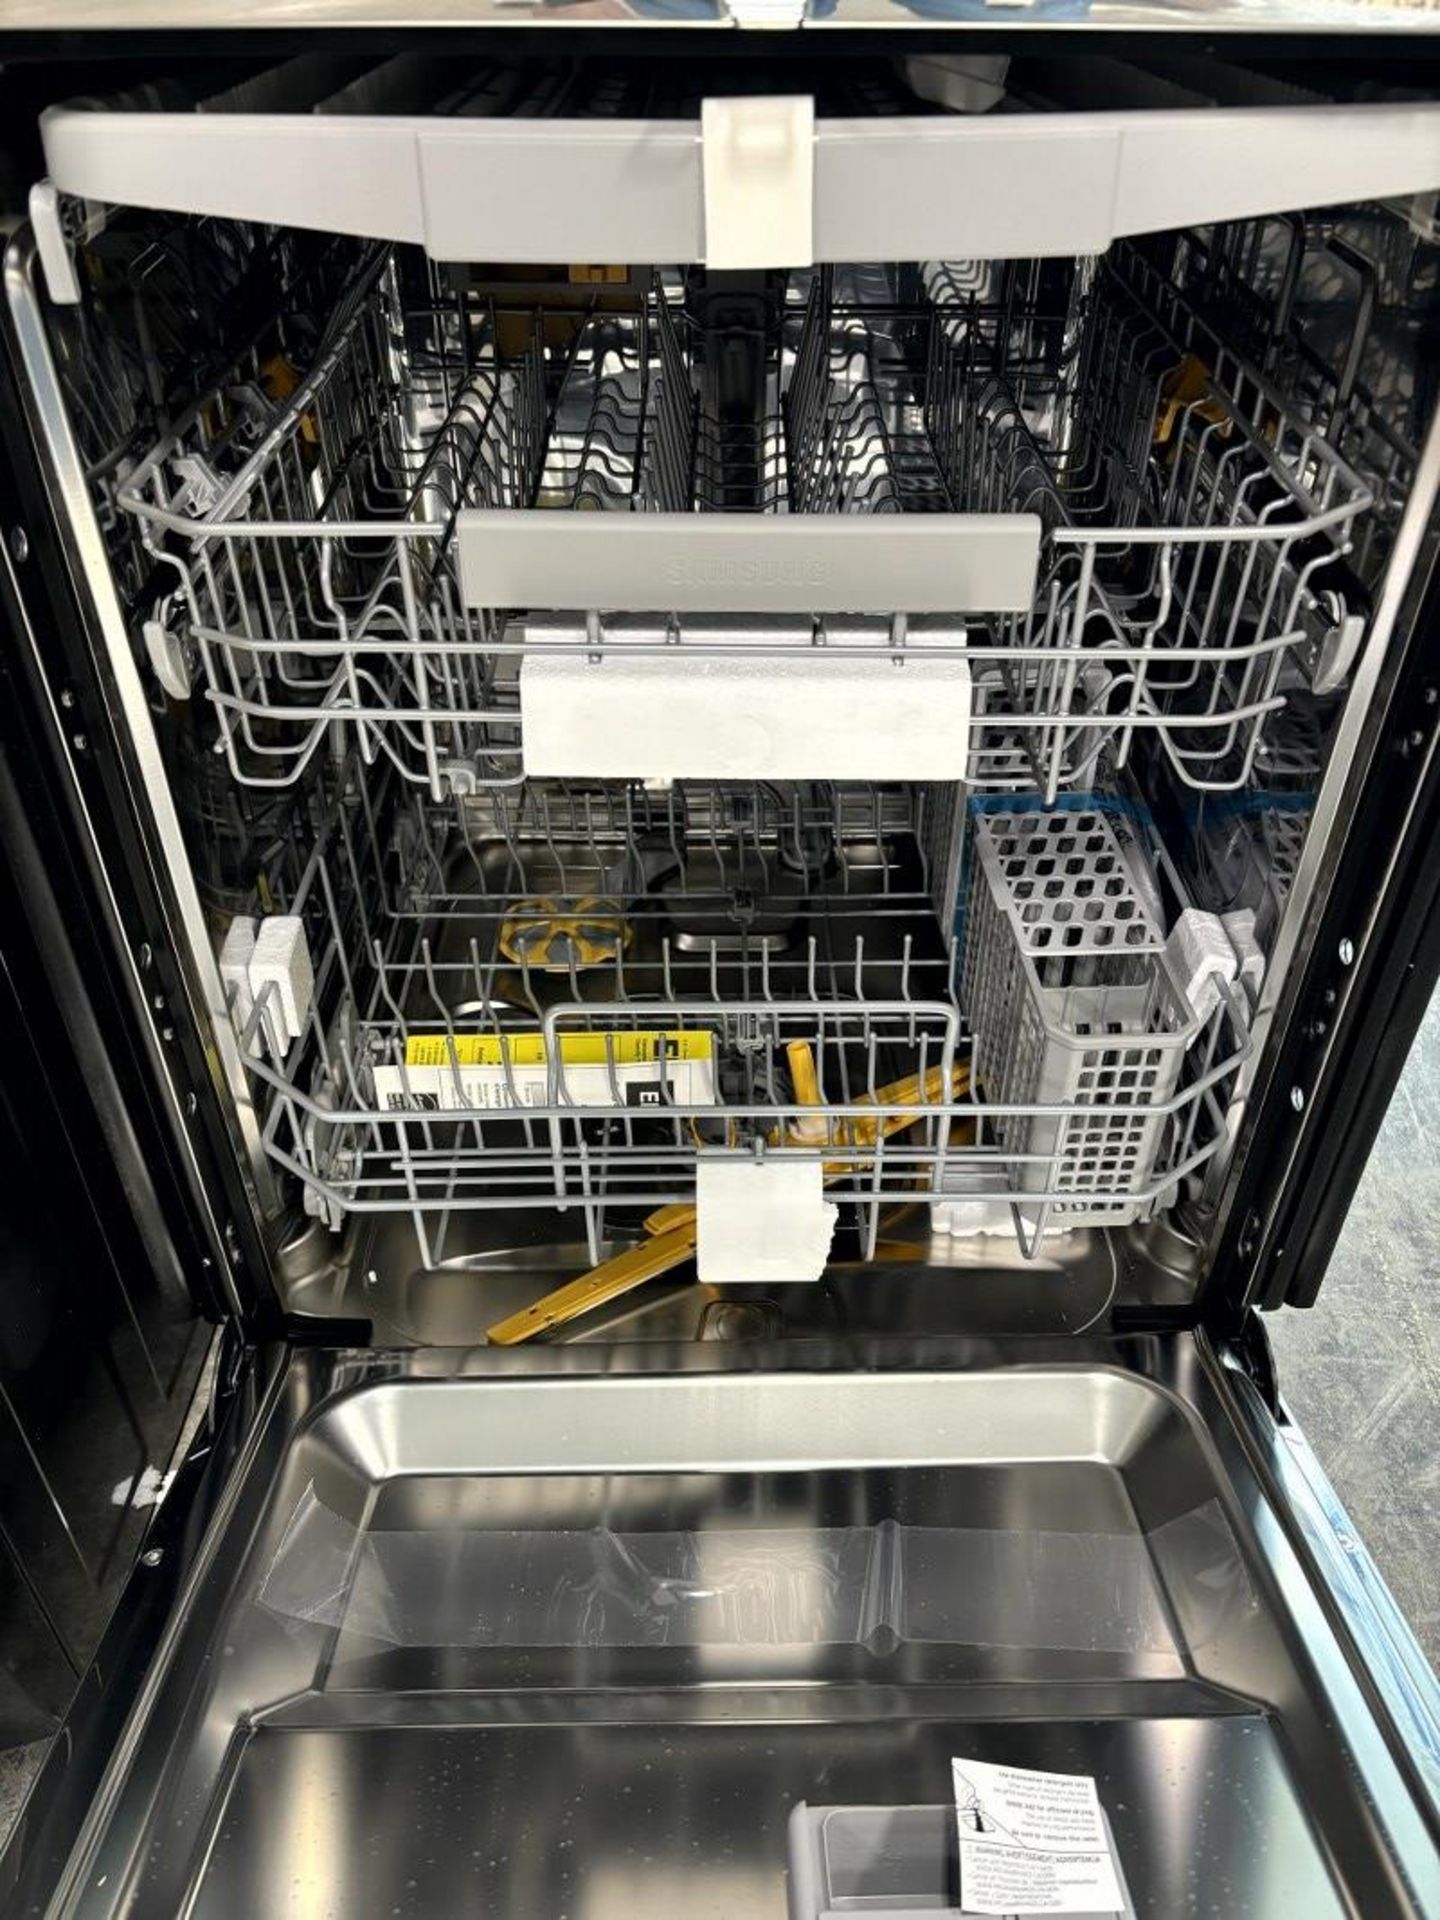 Samsung - Dishwasher, 24 Inch Exterior Width, 44 Db Decibel Level, Fully Integrated, Stainless Steel - Image 3 of 5